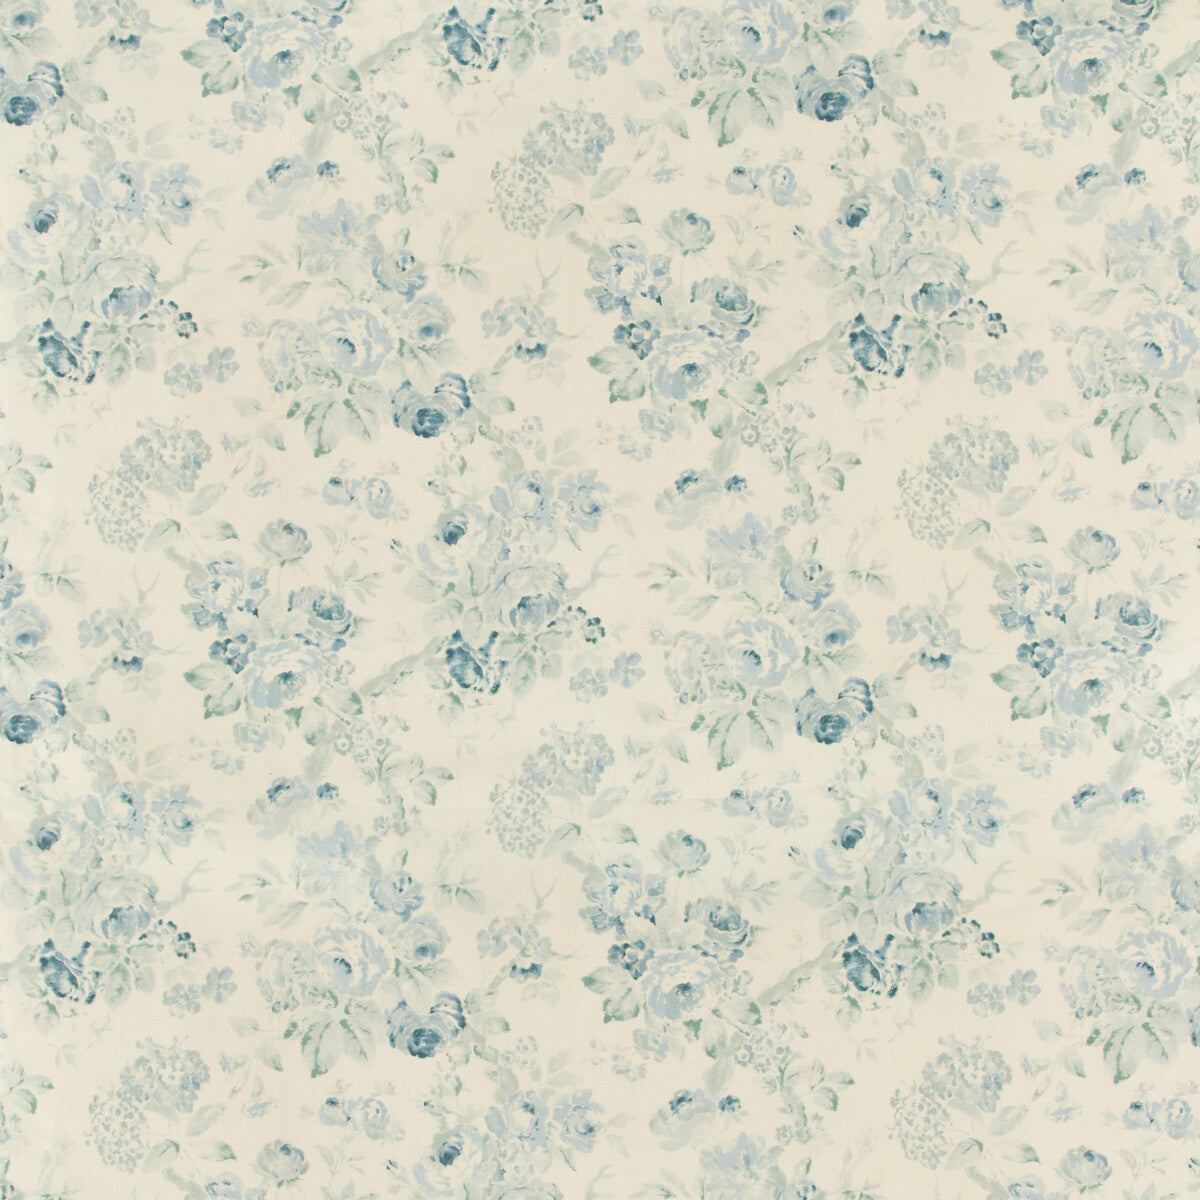 Garden Roses fabric in aqua/blue color - pattern 2007157.153.0 - by Lee Jofa in the Suzanne Rheinstein III collection